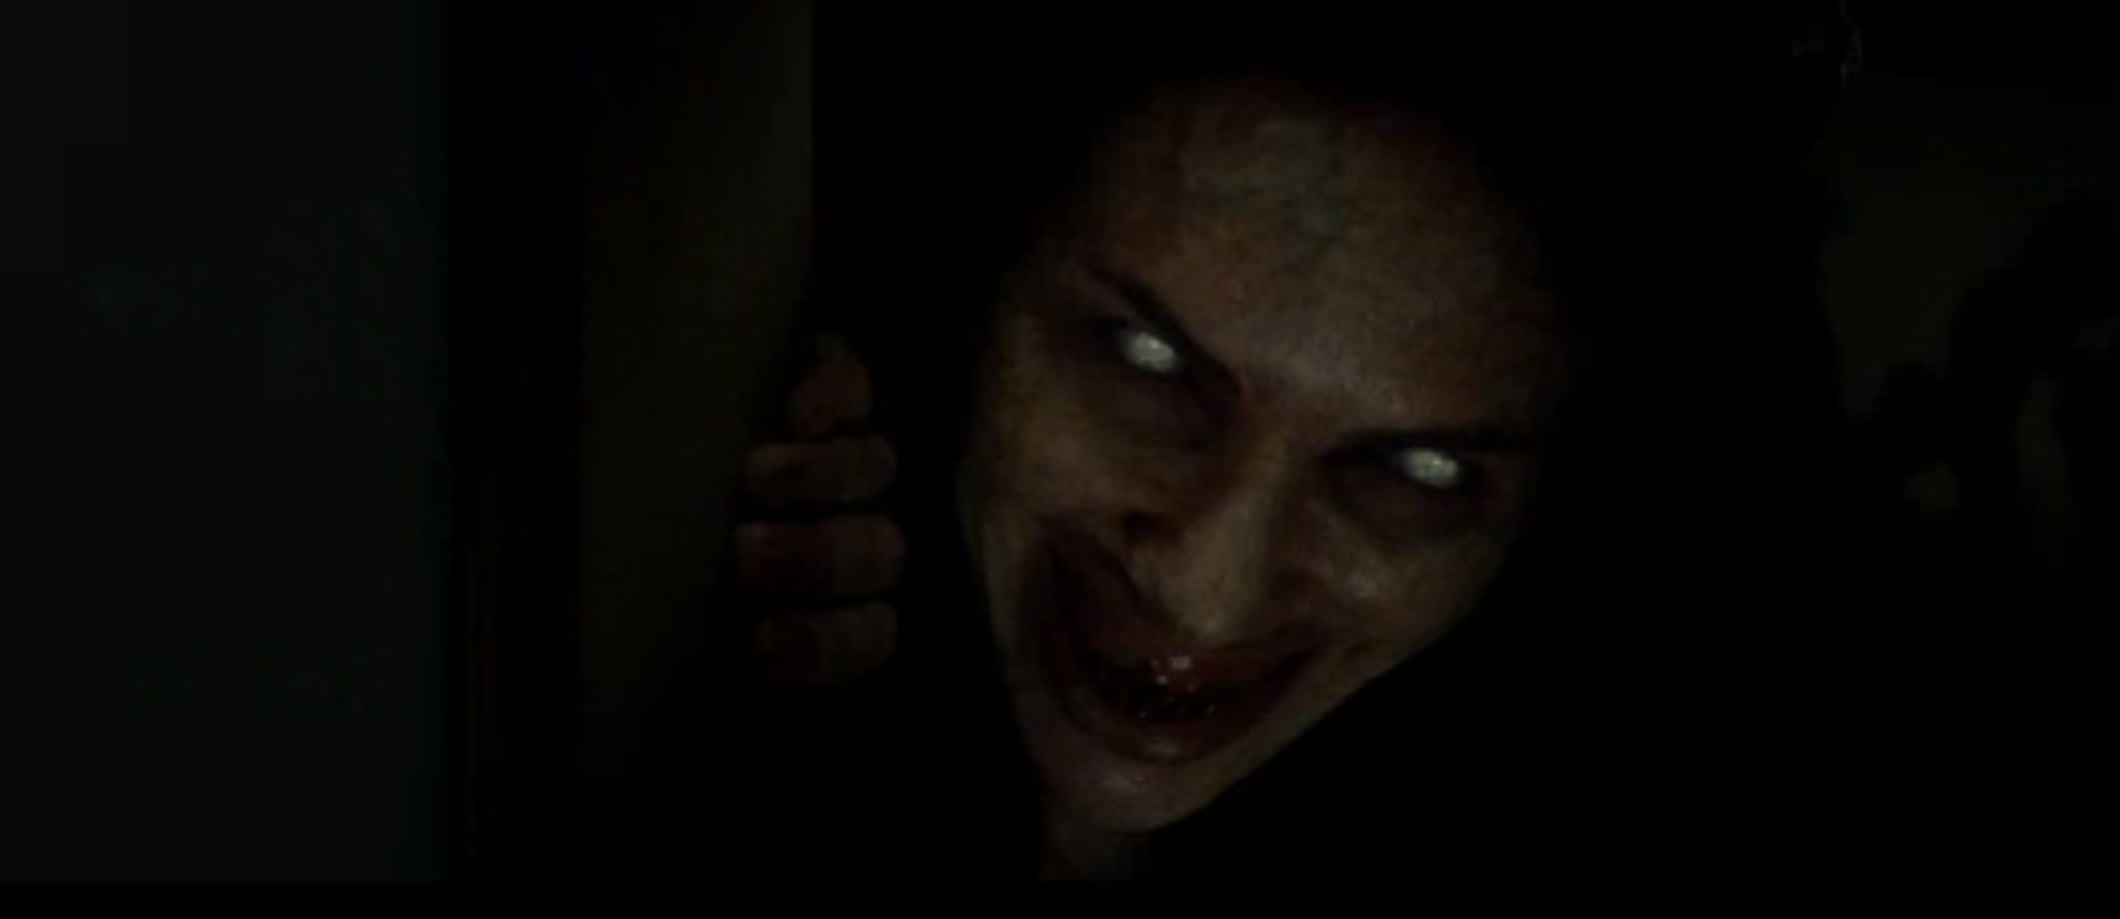 Awesome 'Oculus' Trailer Bleeds Scares! - Bloody Disgusting